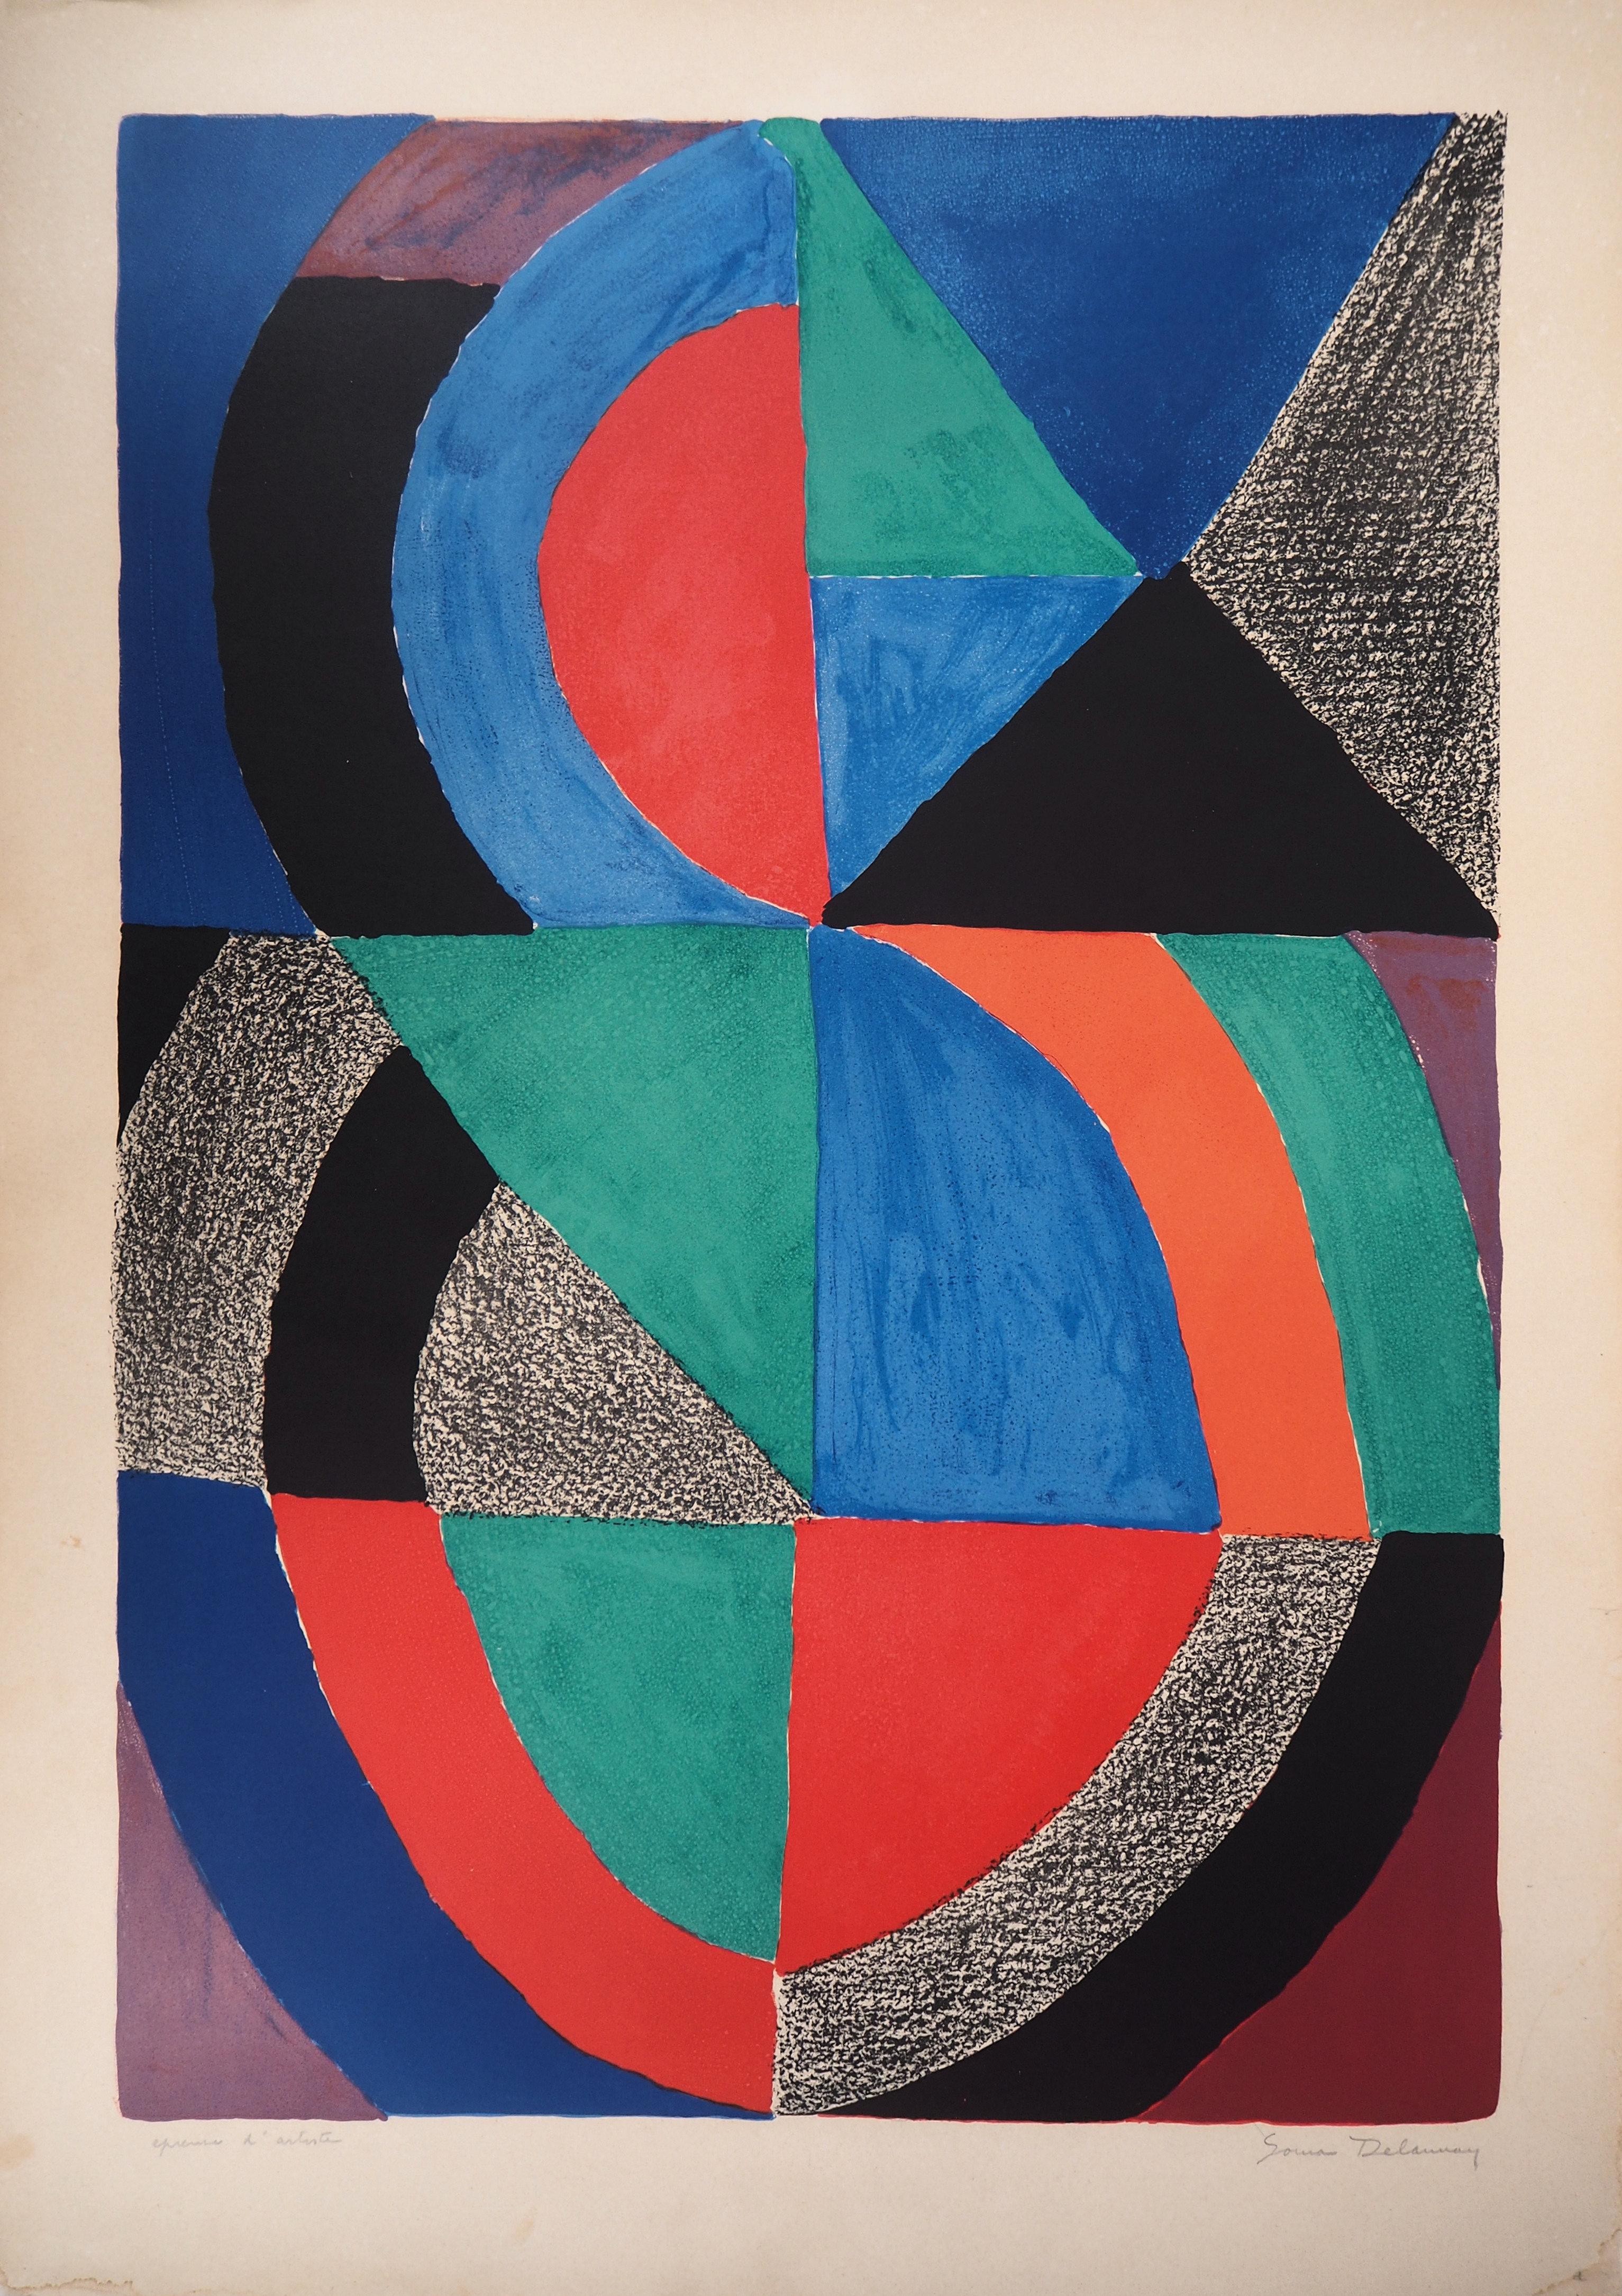 Sonia Delaunay Abstract Print - Rythm and colors (Tall Icon) - Original lithograph, Handsigned